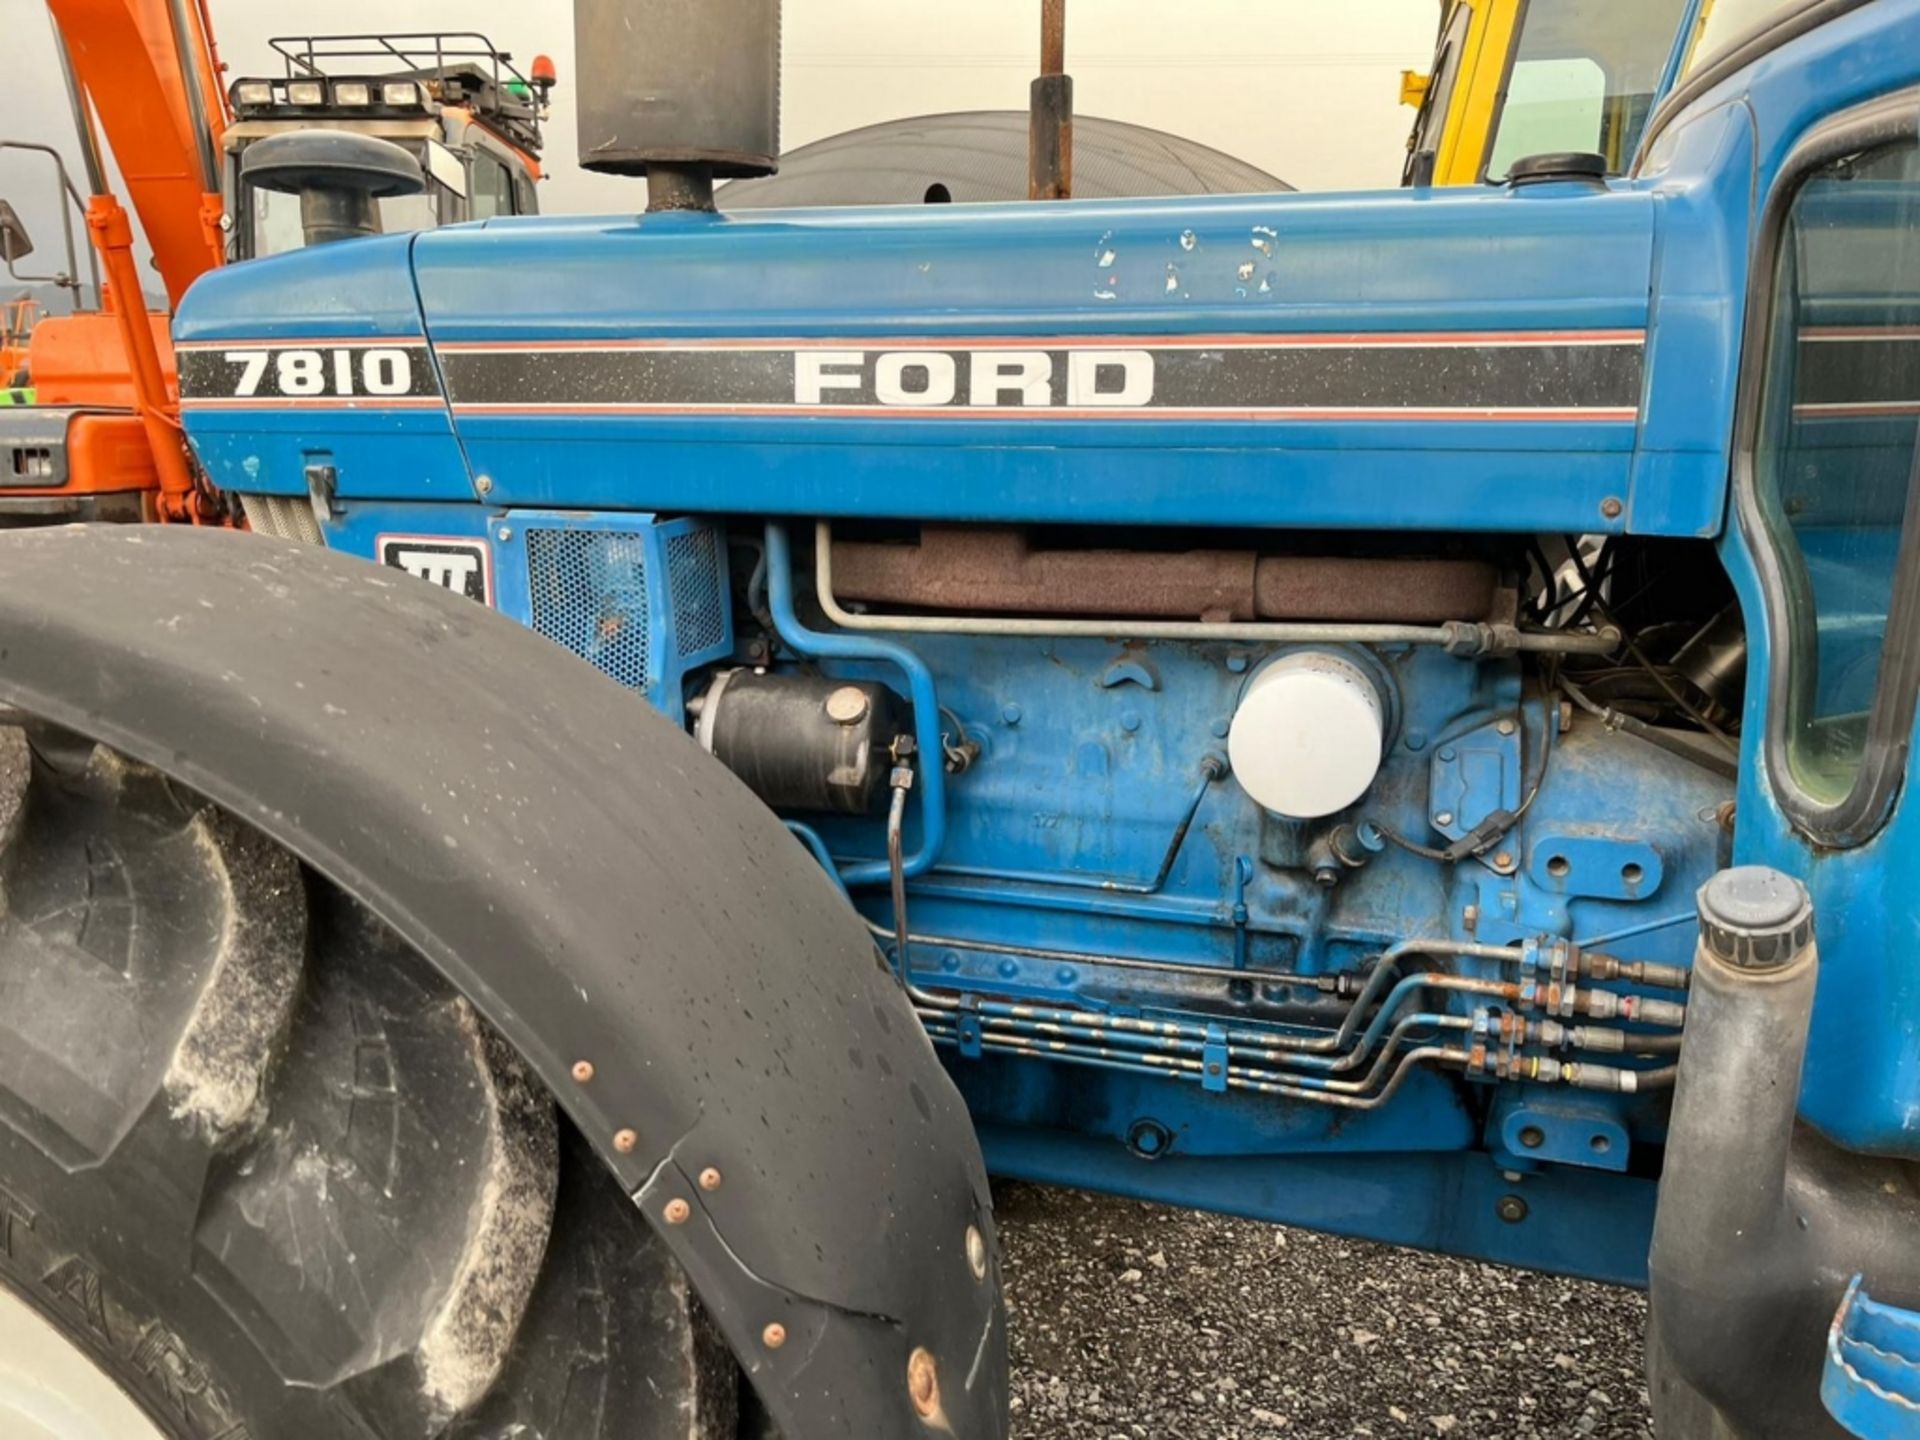 VINTAGE TRACTOR FORD 7810 - Image 17 of 18